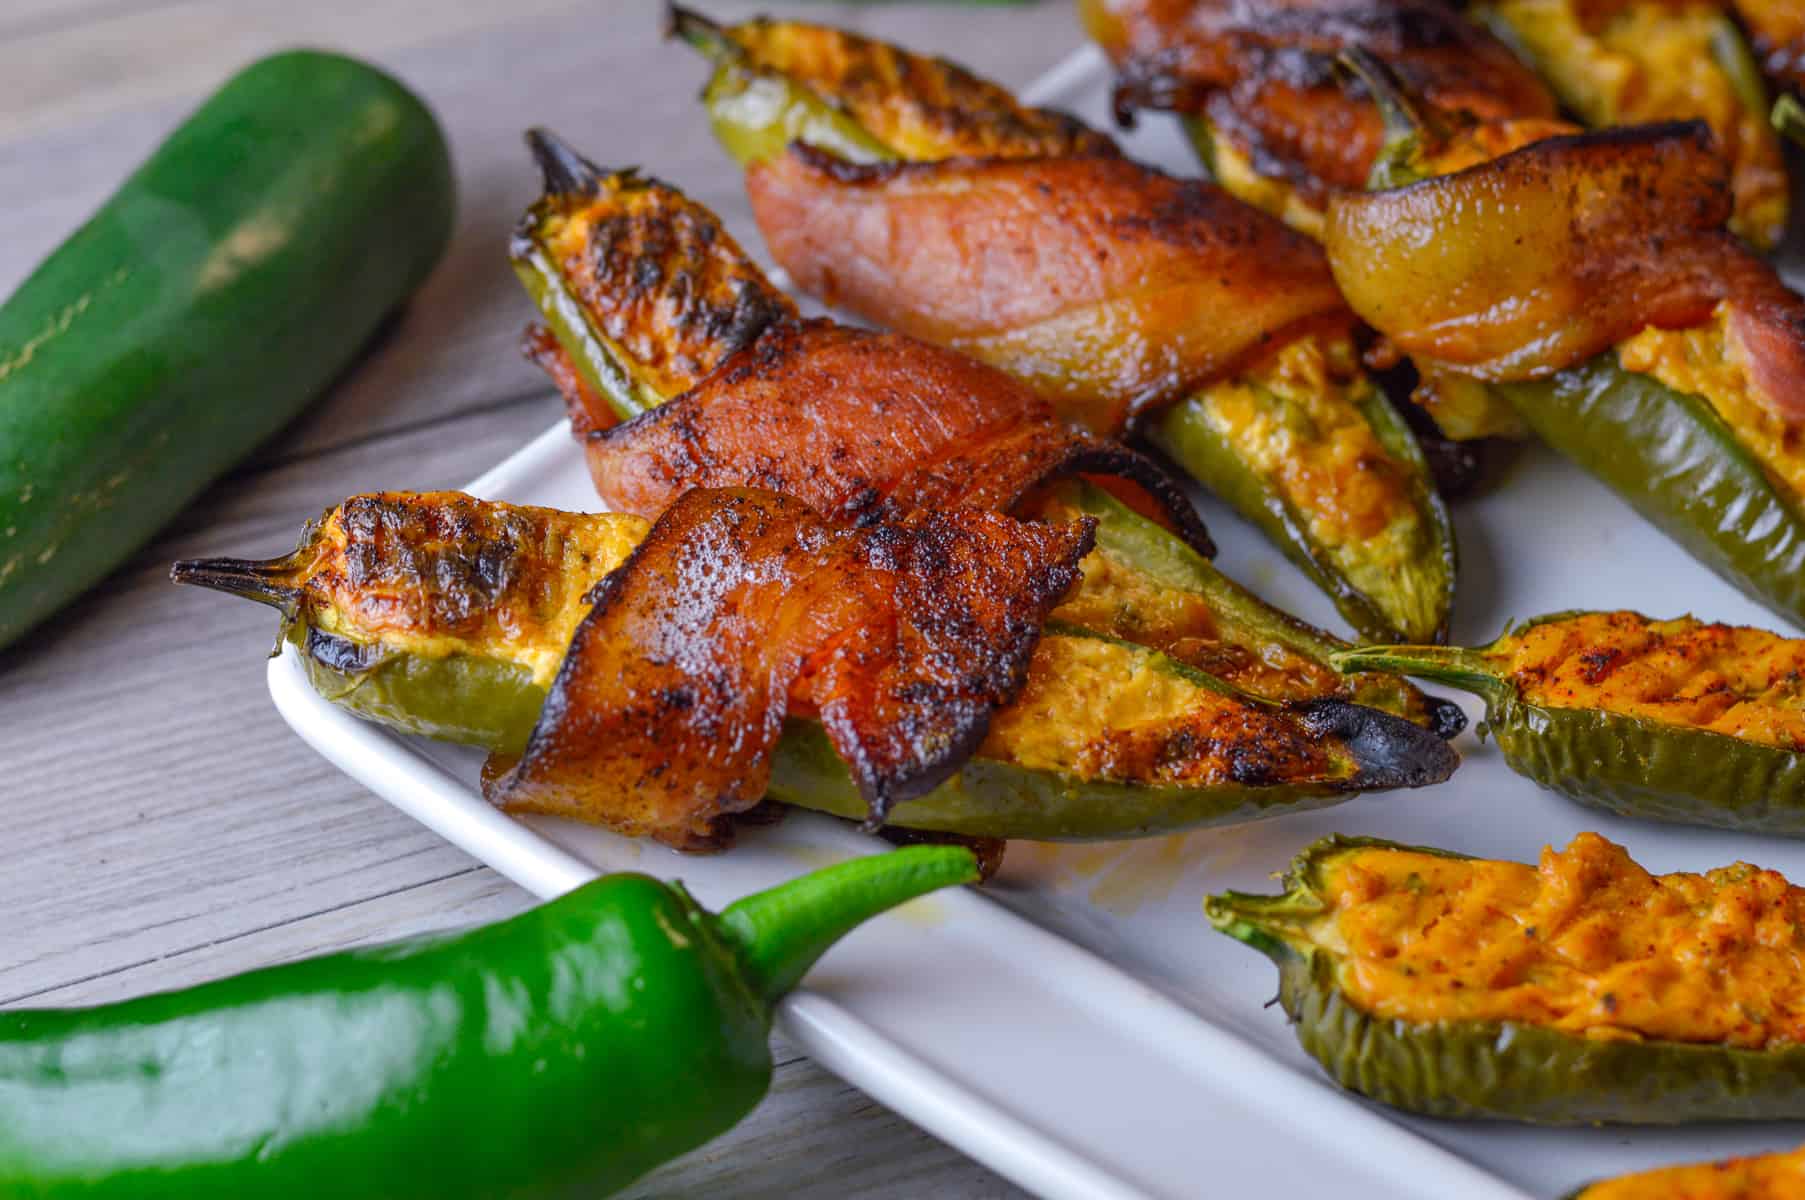 Bacon-wrapped smoked jalapeno poppers on a white platter with some raw jalapenos to the left side.